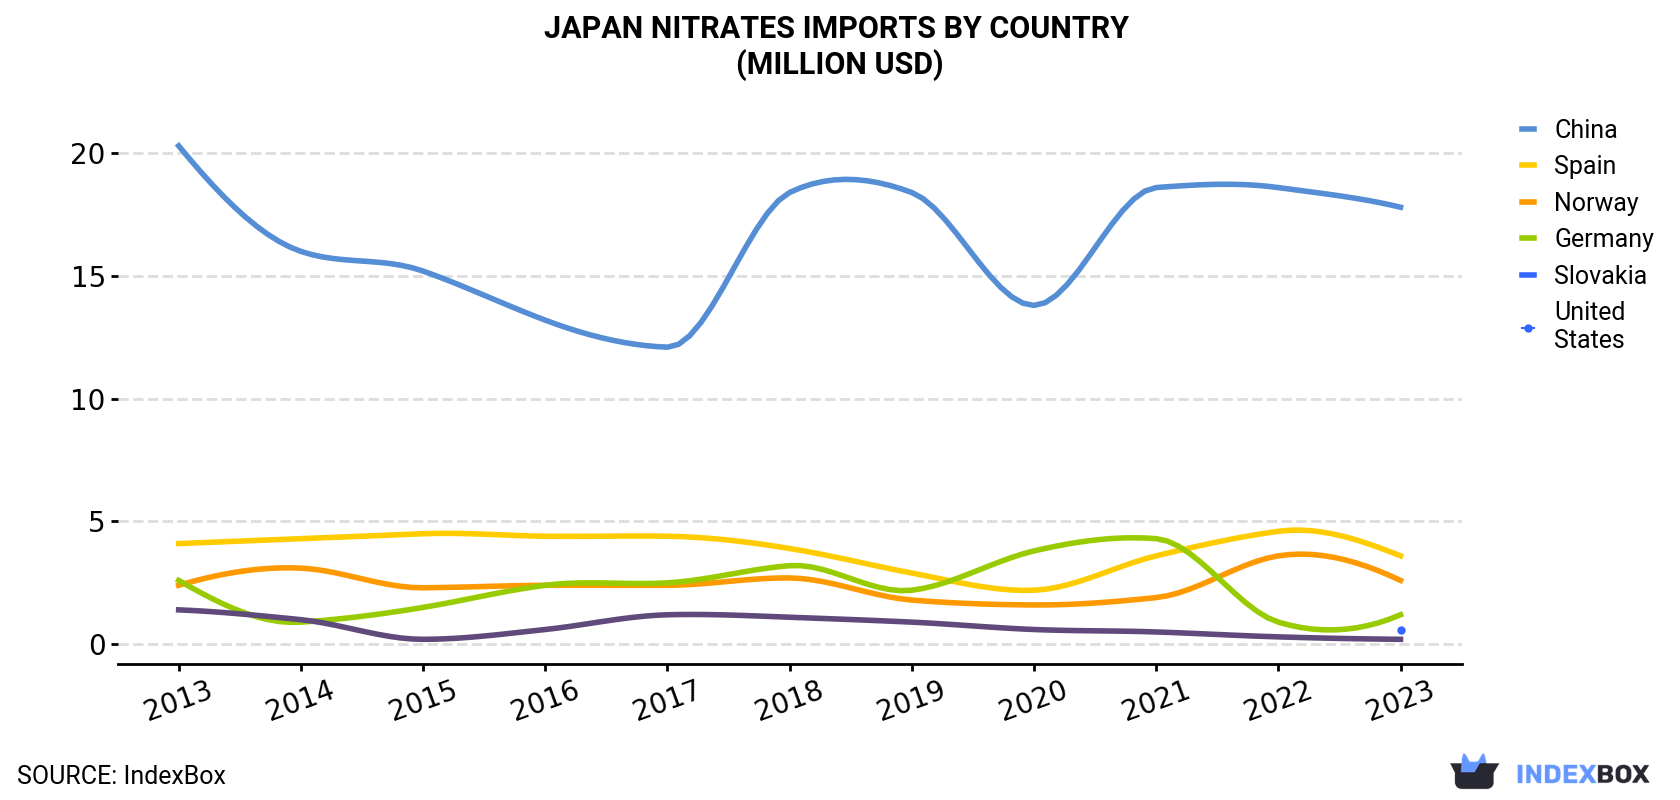 Japan Nitrates Imports By Country (Million USD)